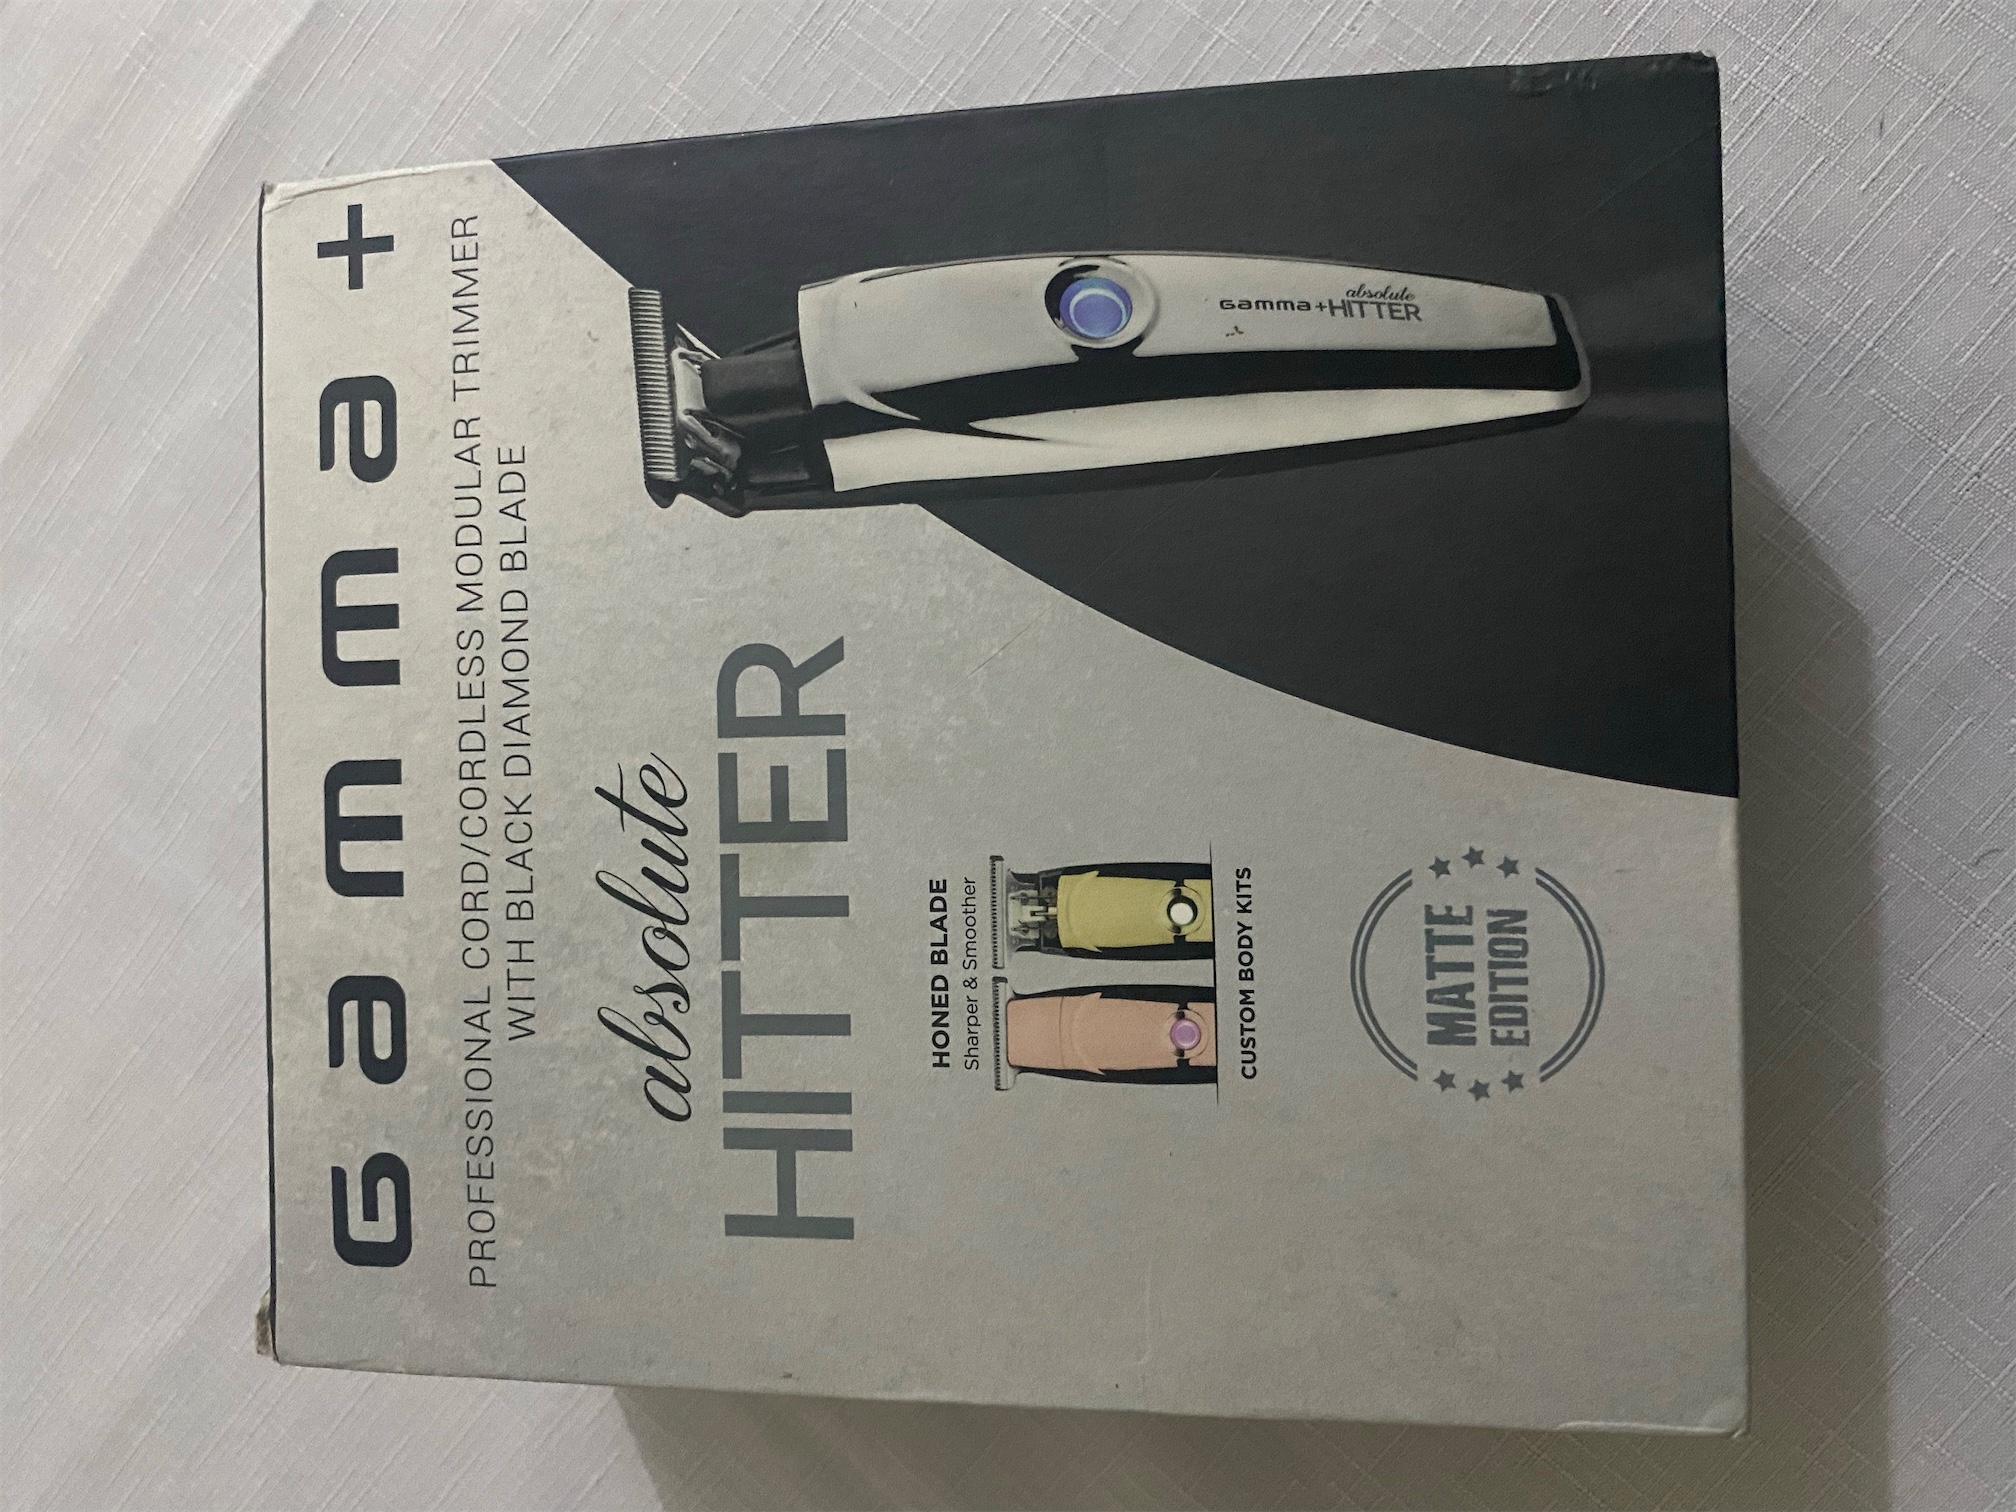 salud y belleza - GAMMA+ absolute hitter trimmer 4